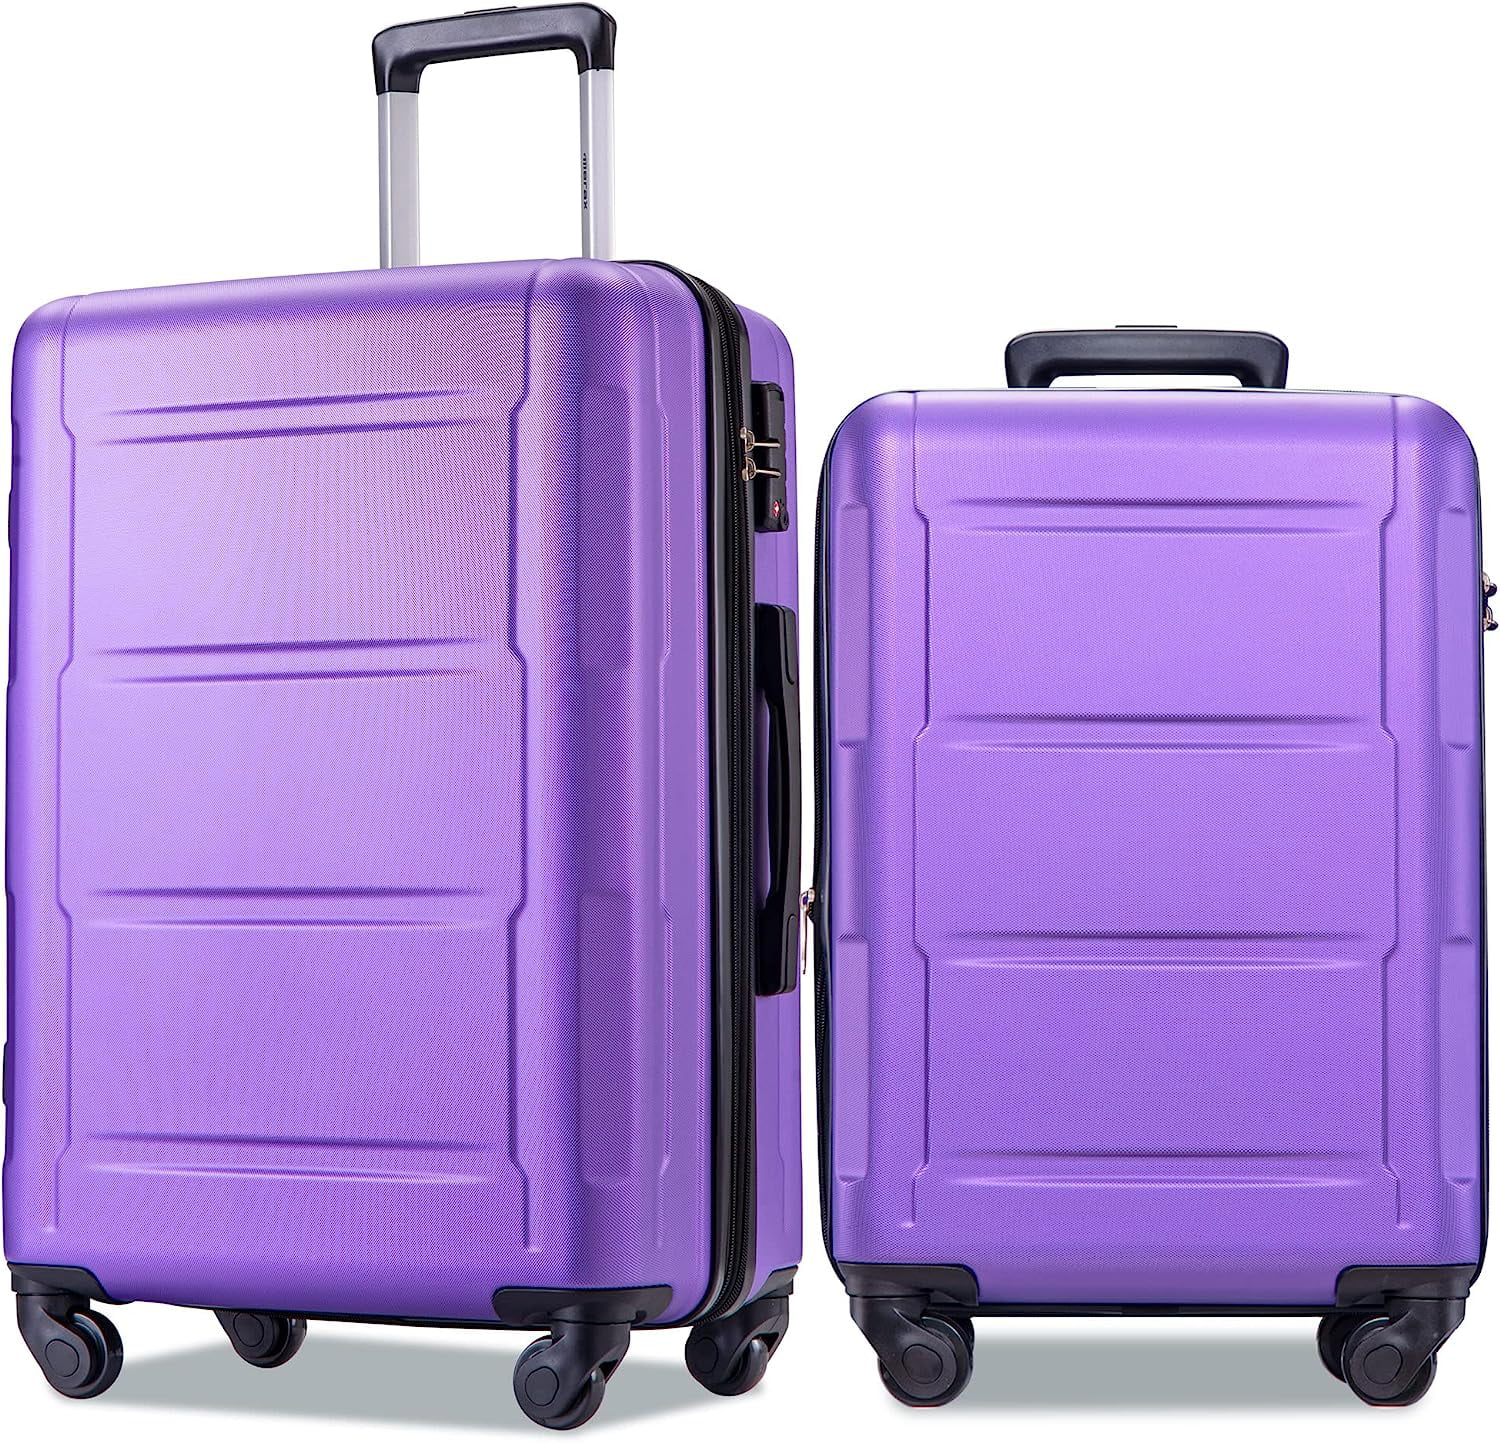 Luggage Sets 2 Piece Suitcase Set 20/24,Carry On Luggage Airline ...